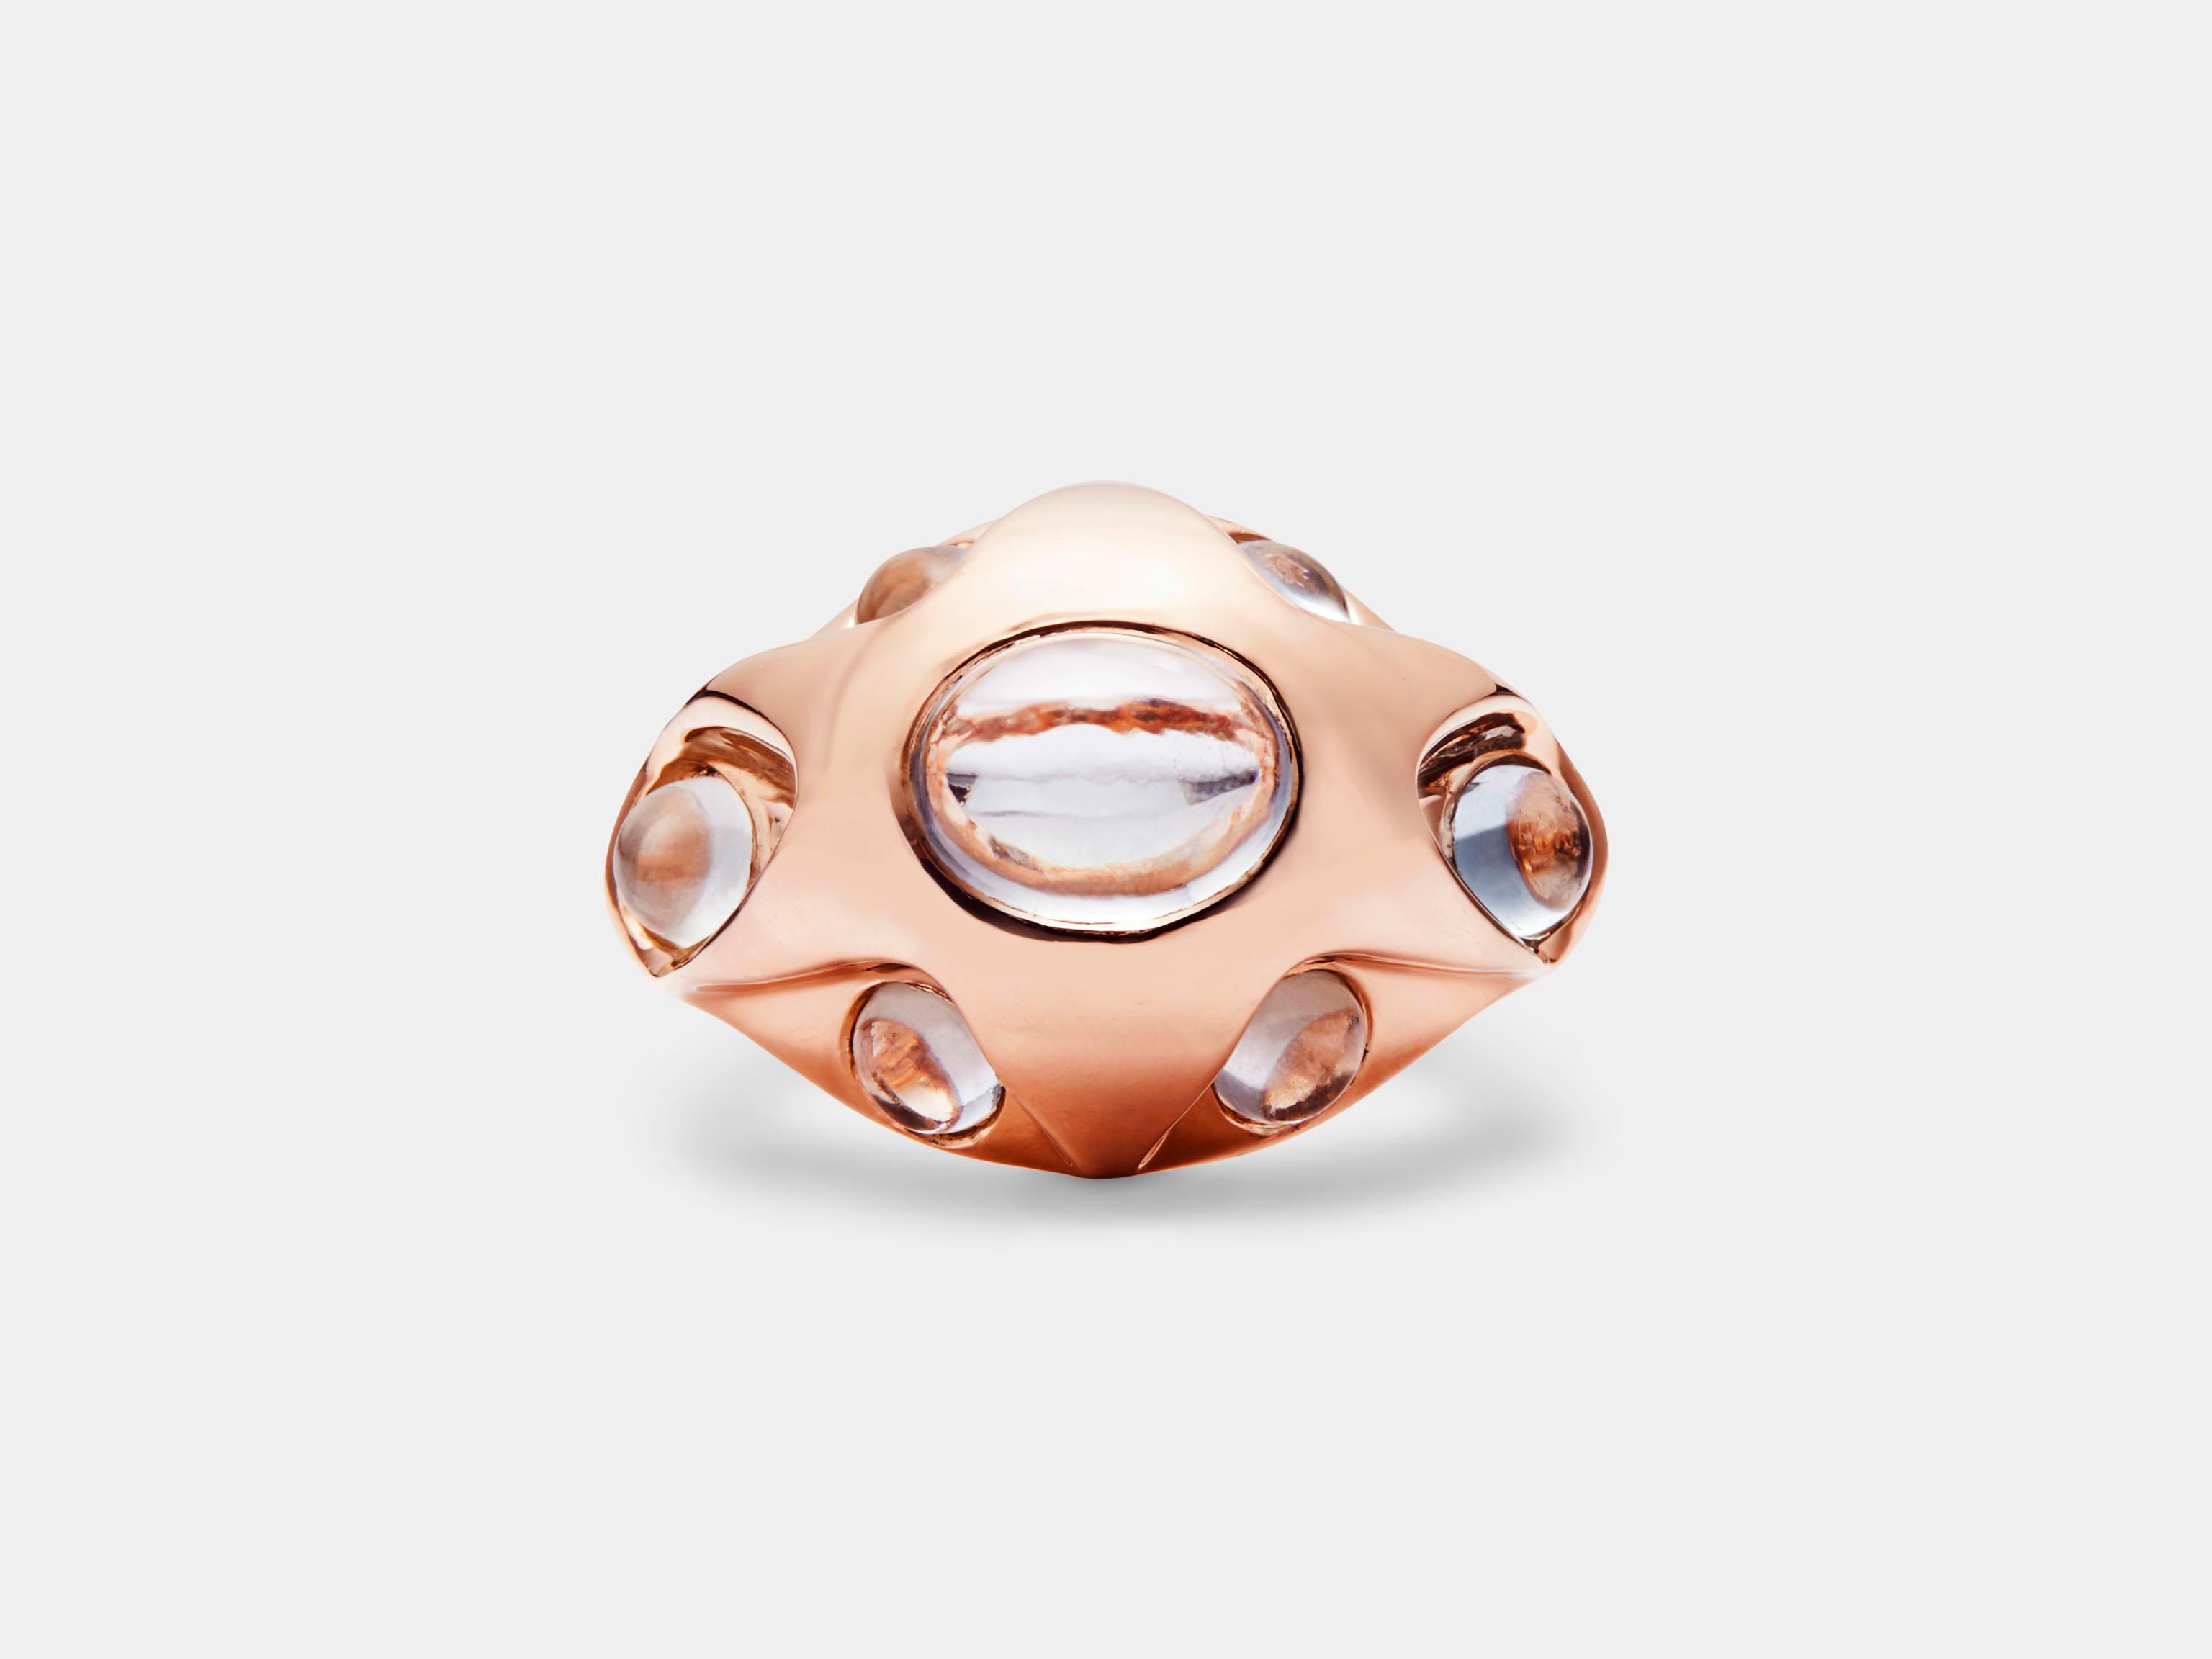 Sagan Bombé Ring with Aquamarine from modern fine jewelry house, Baker & Black. This cocktail ring, with its astral shape and retrofuturist vibes, draws its name from cosmologist and 80's icon, Carl Sagan. Featuring one of our favorite duos, rose